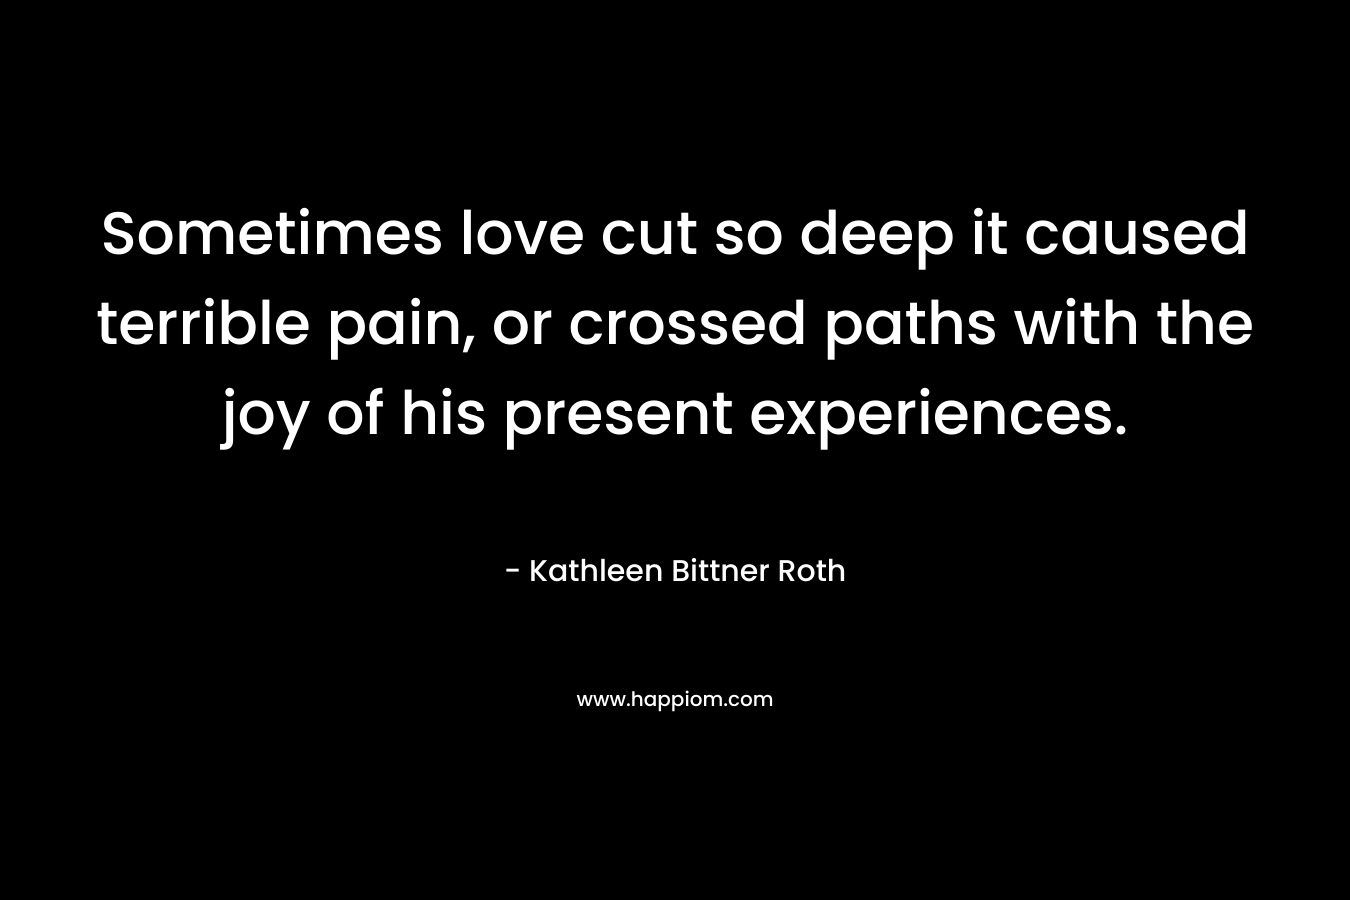 Sometimes love cut so deep it caused terrible pain, or crossed paths with the joy of his present experiences. – Kathleen Bittner Roth